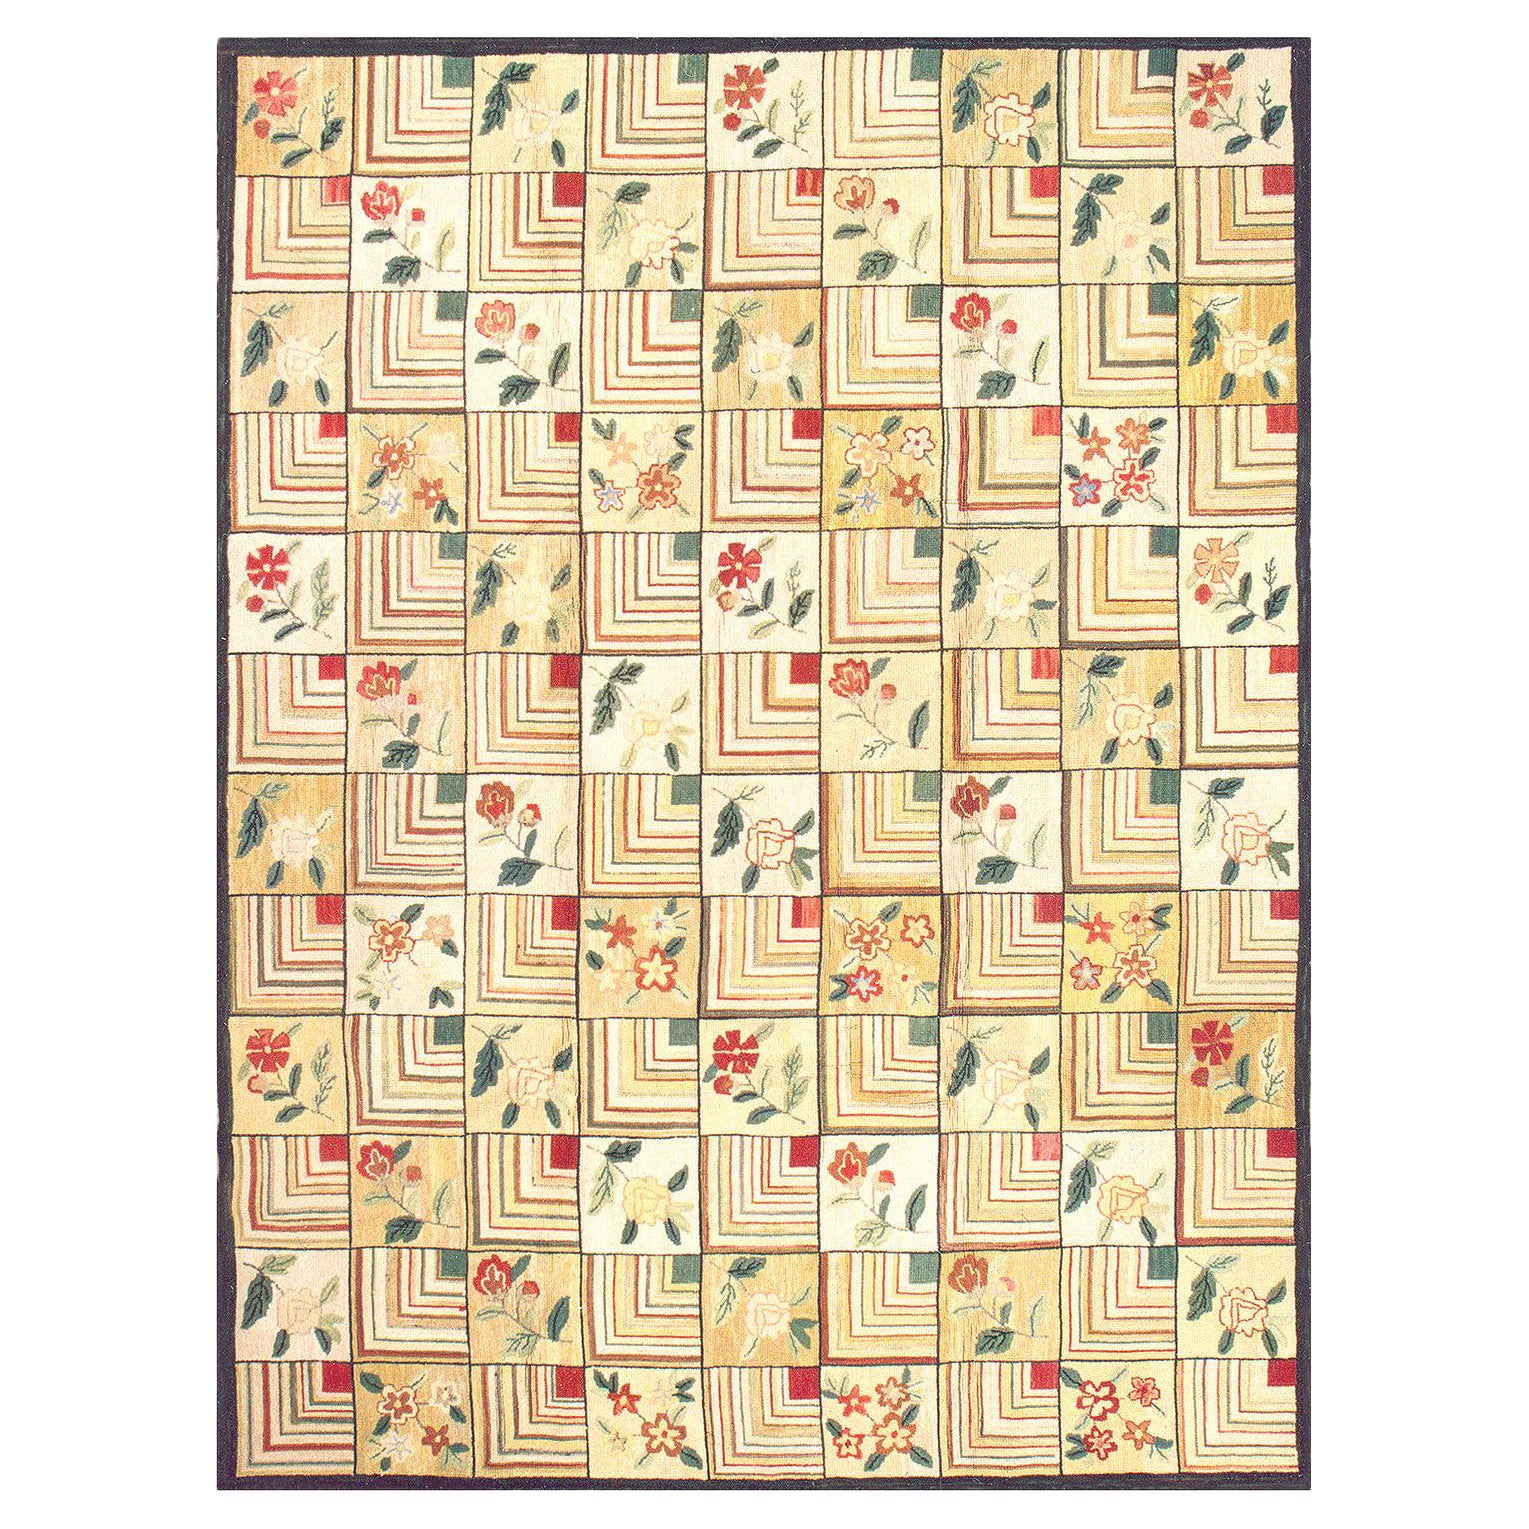 Contemporary American Hooked Rug (8' x 10' - 244x305) For Sale